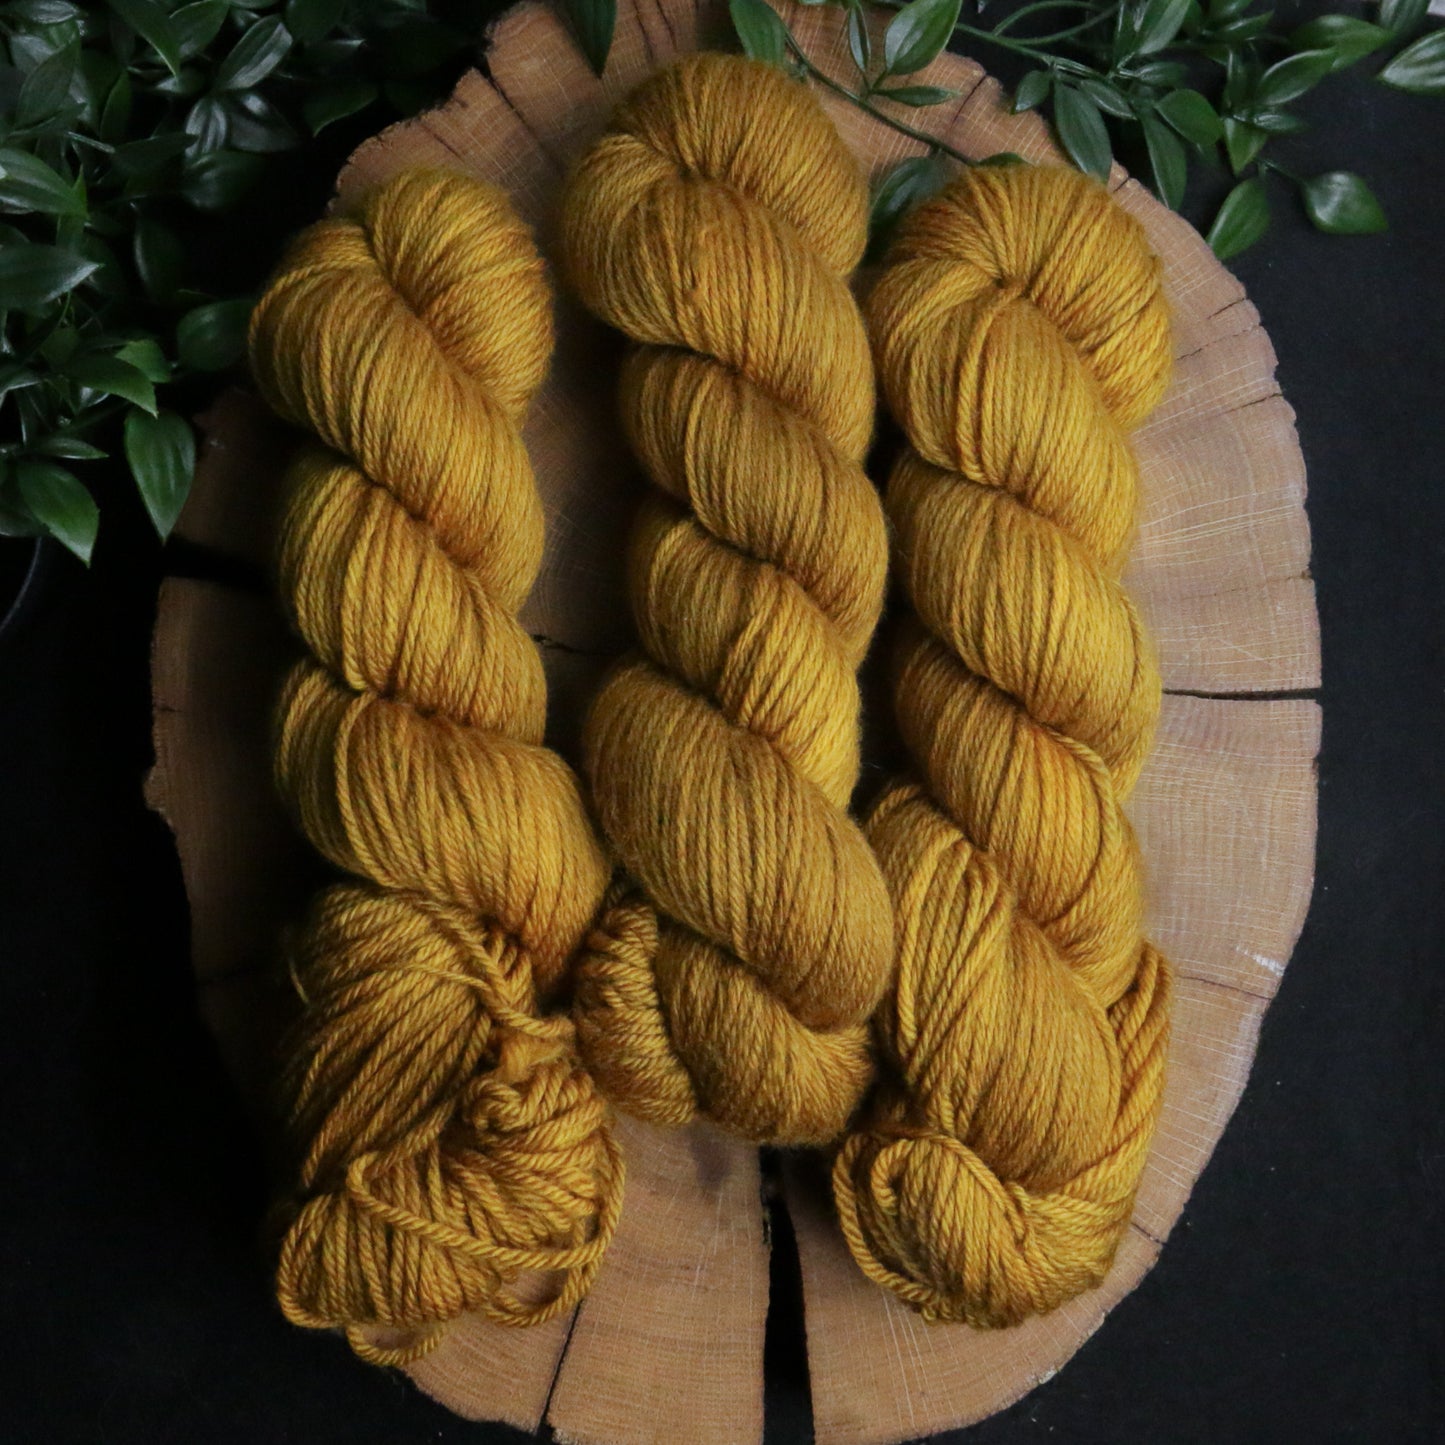 Baltic Amber - Sweater Quantity and Dyed to Order